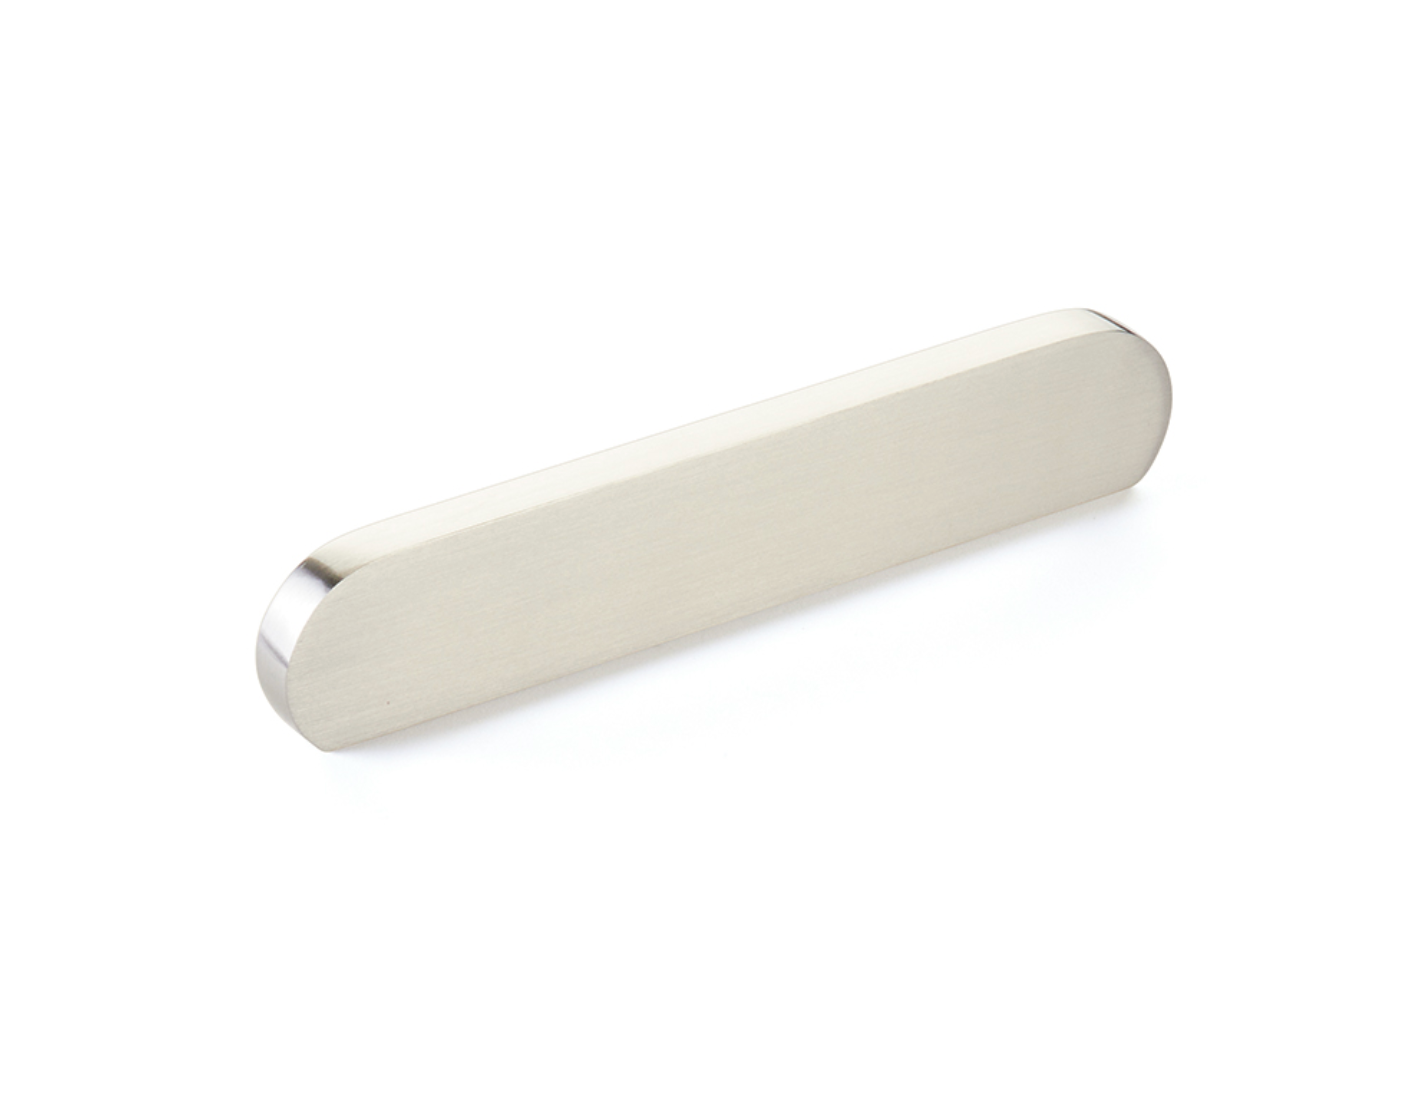 Brushed Nickel "Bit" Rounded Drawer Pulls and Cabinet Knobs